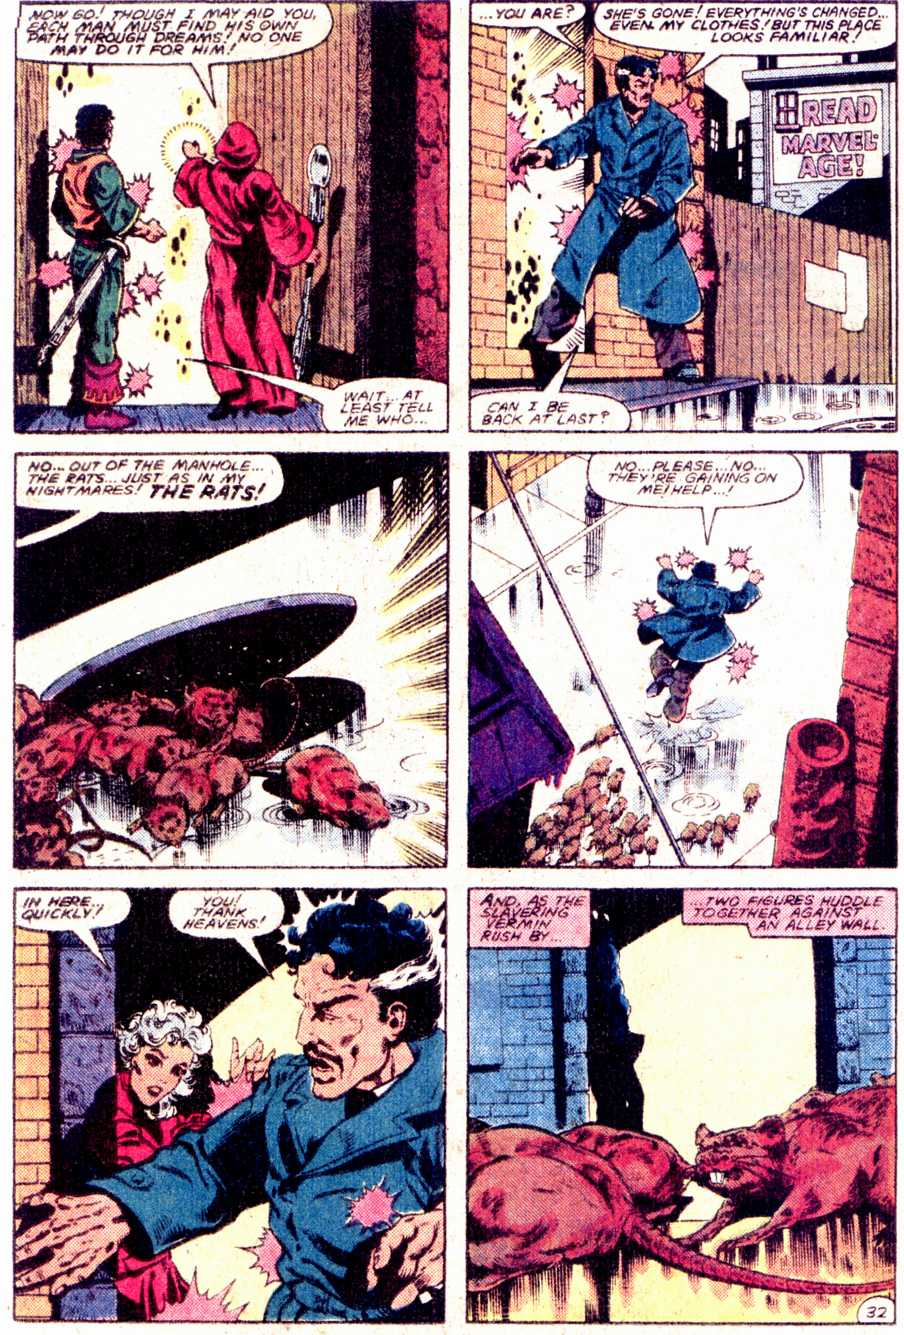 What If? (1977) issue 40 - Dr Strange had not become master of The mystic arts - Page 33